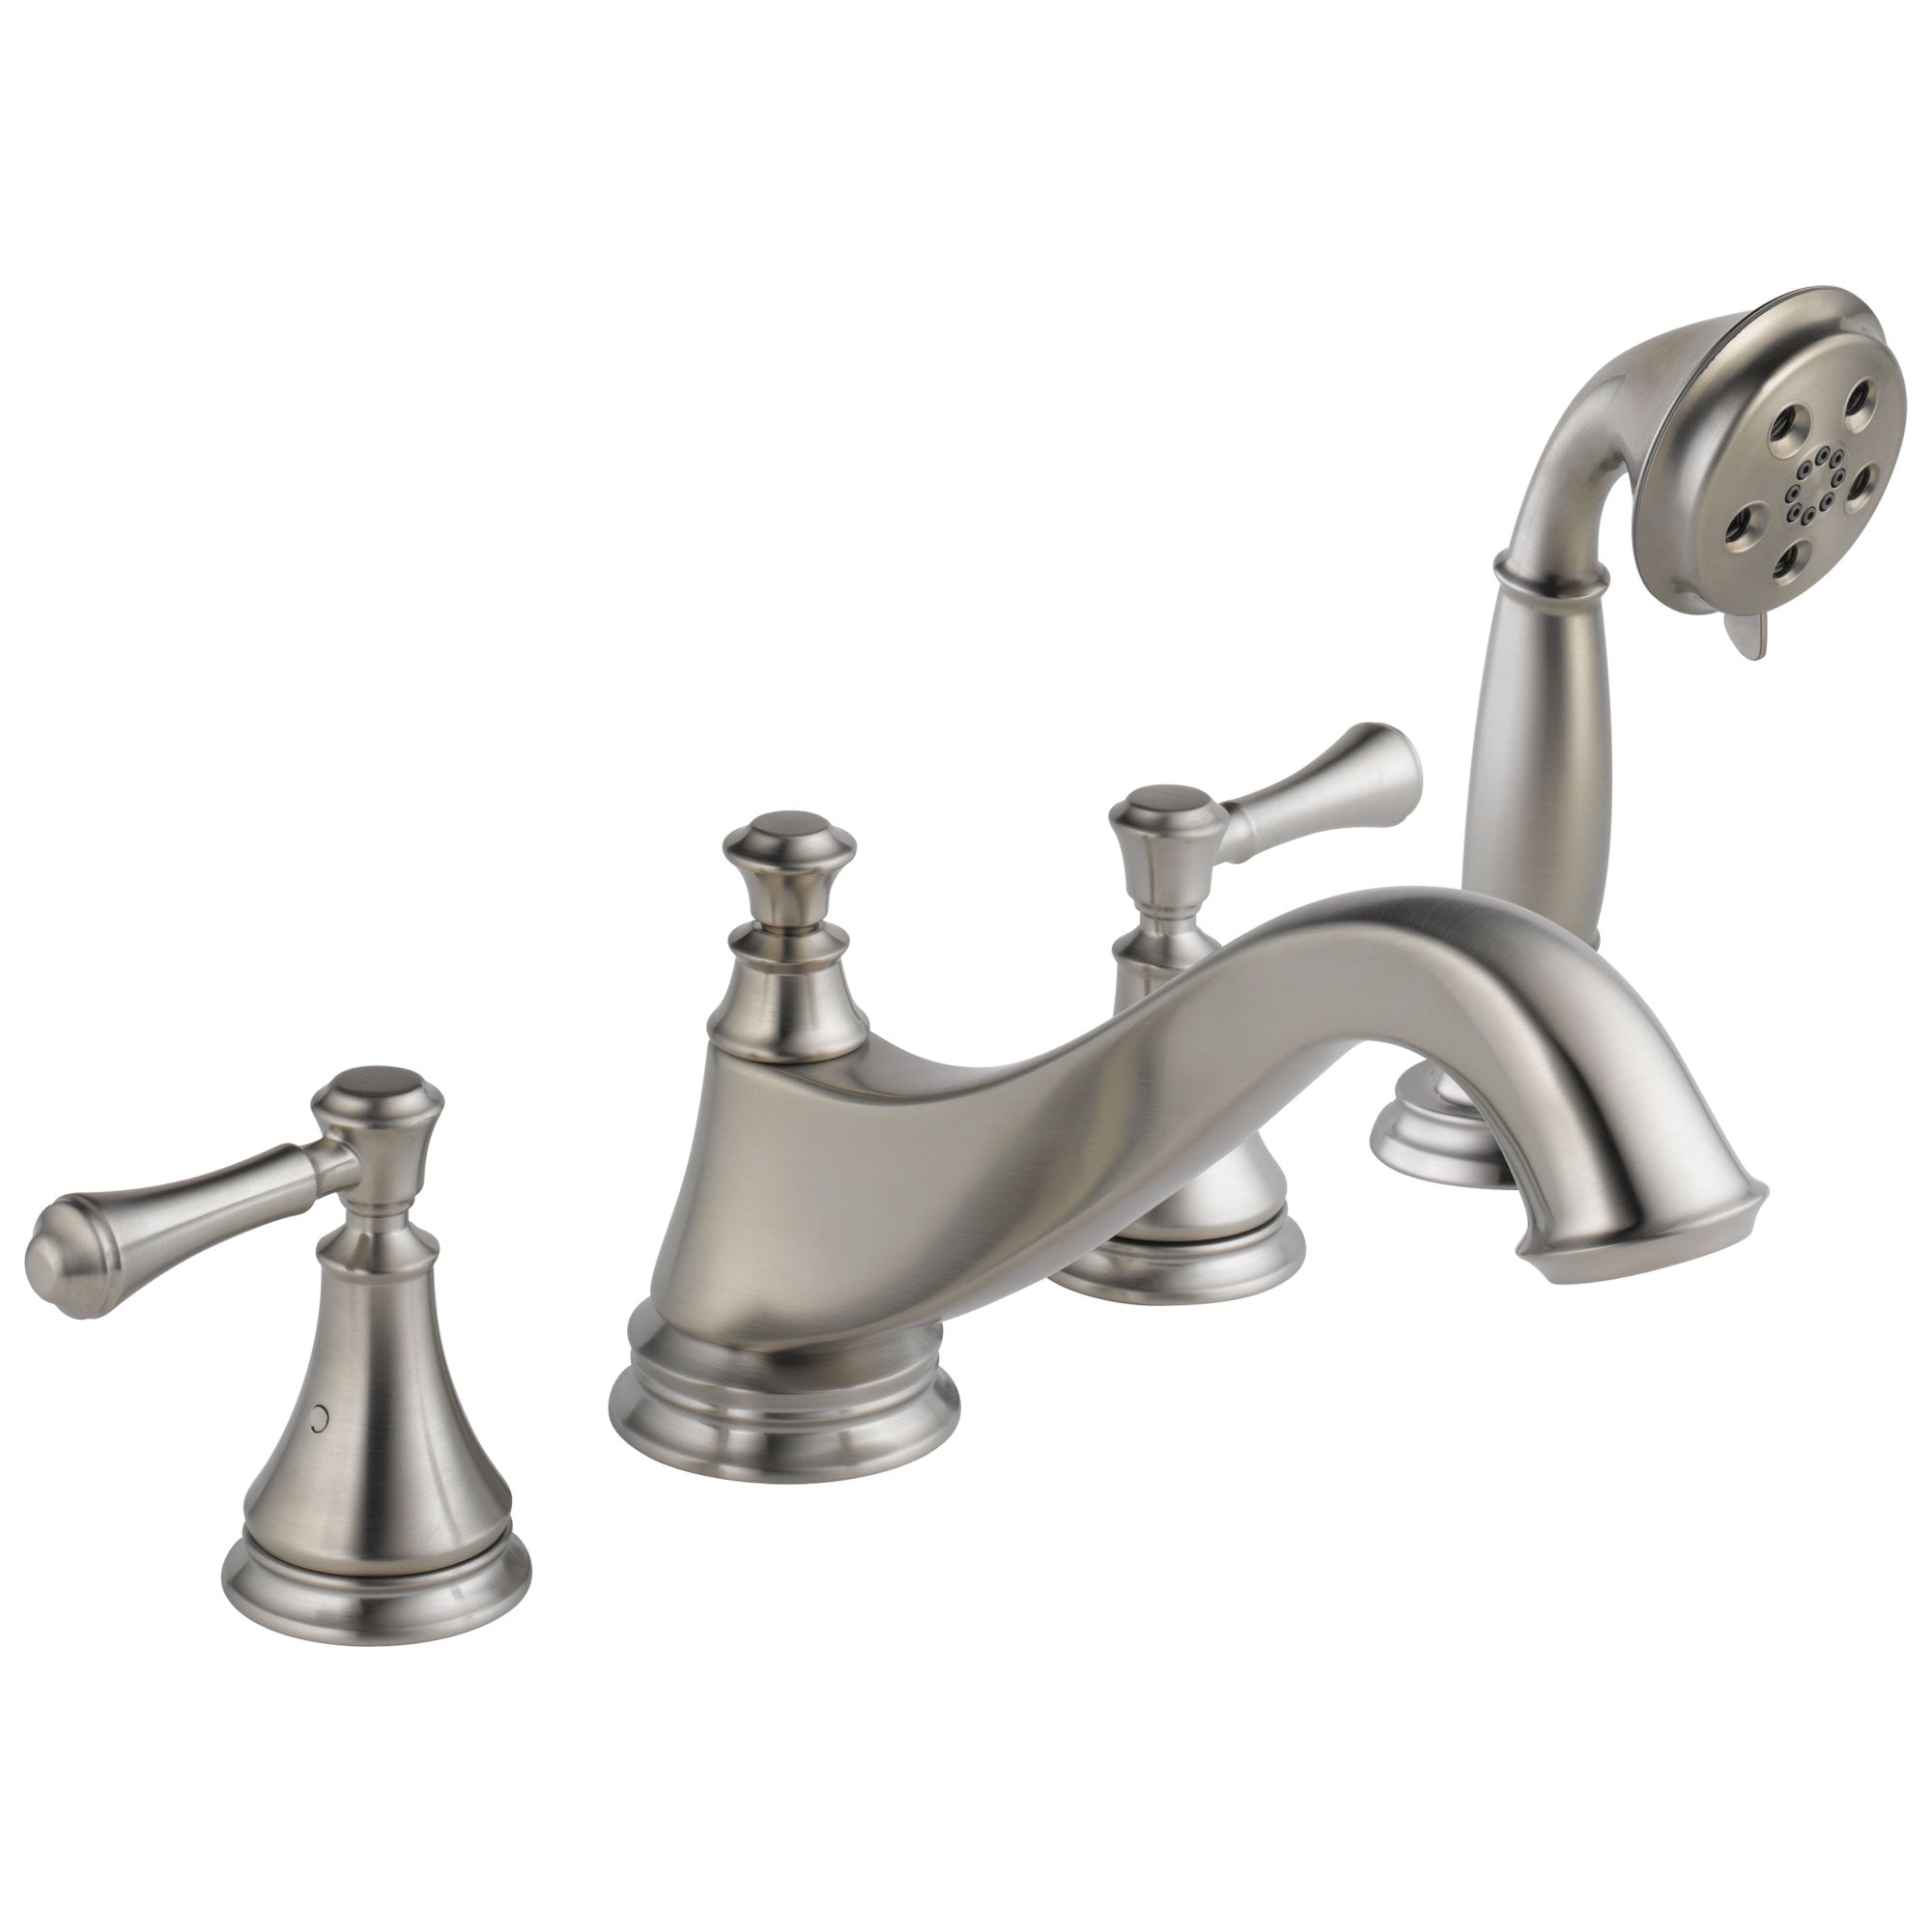 Delta Cassidy Collection Stainless Steel Finish Classic Spout Roman Tub Filler Faucet Trim with Hand Shower INCLUDES (2) Lever Handles and Rough-in Valve D1407V